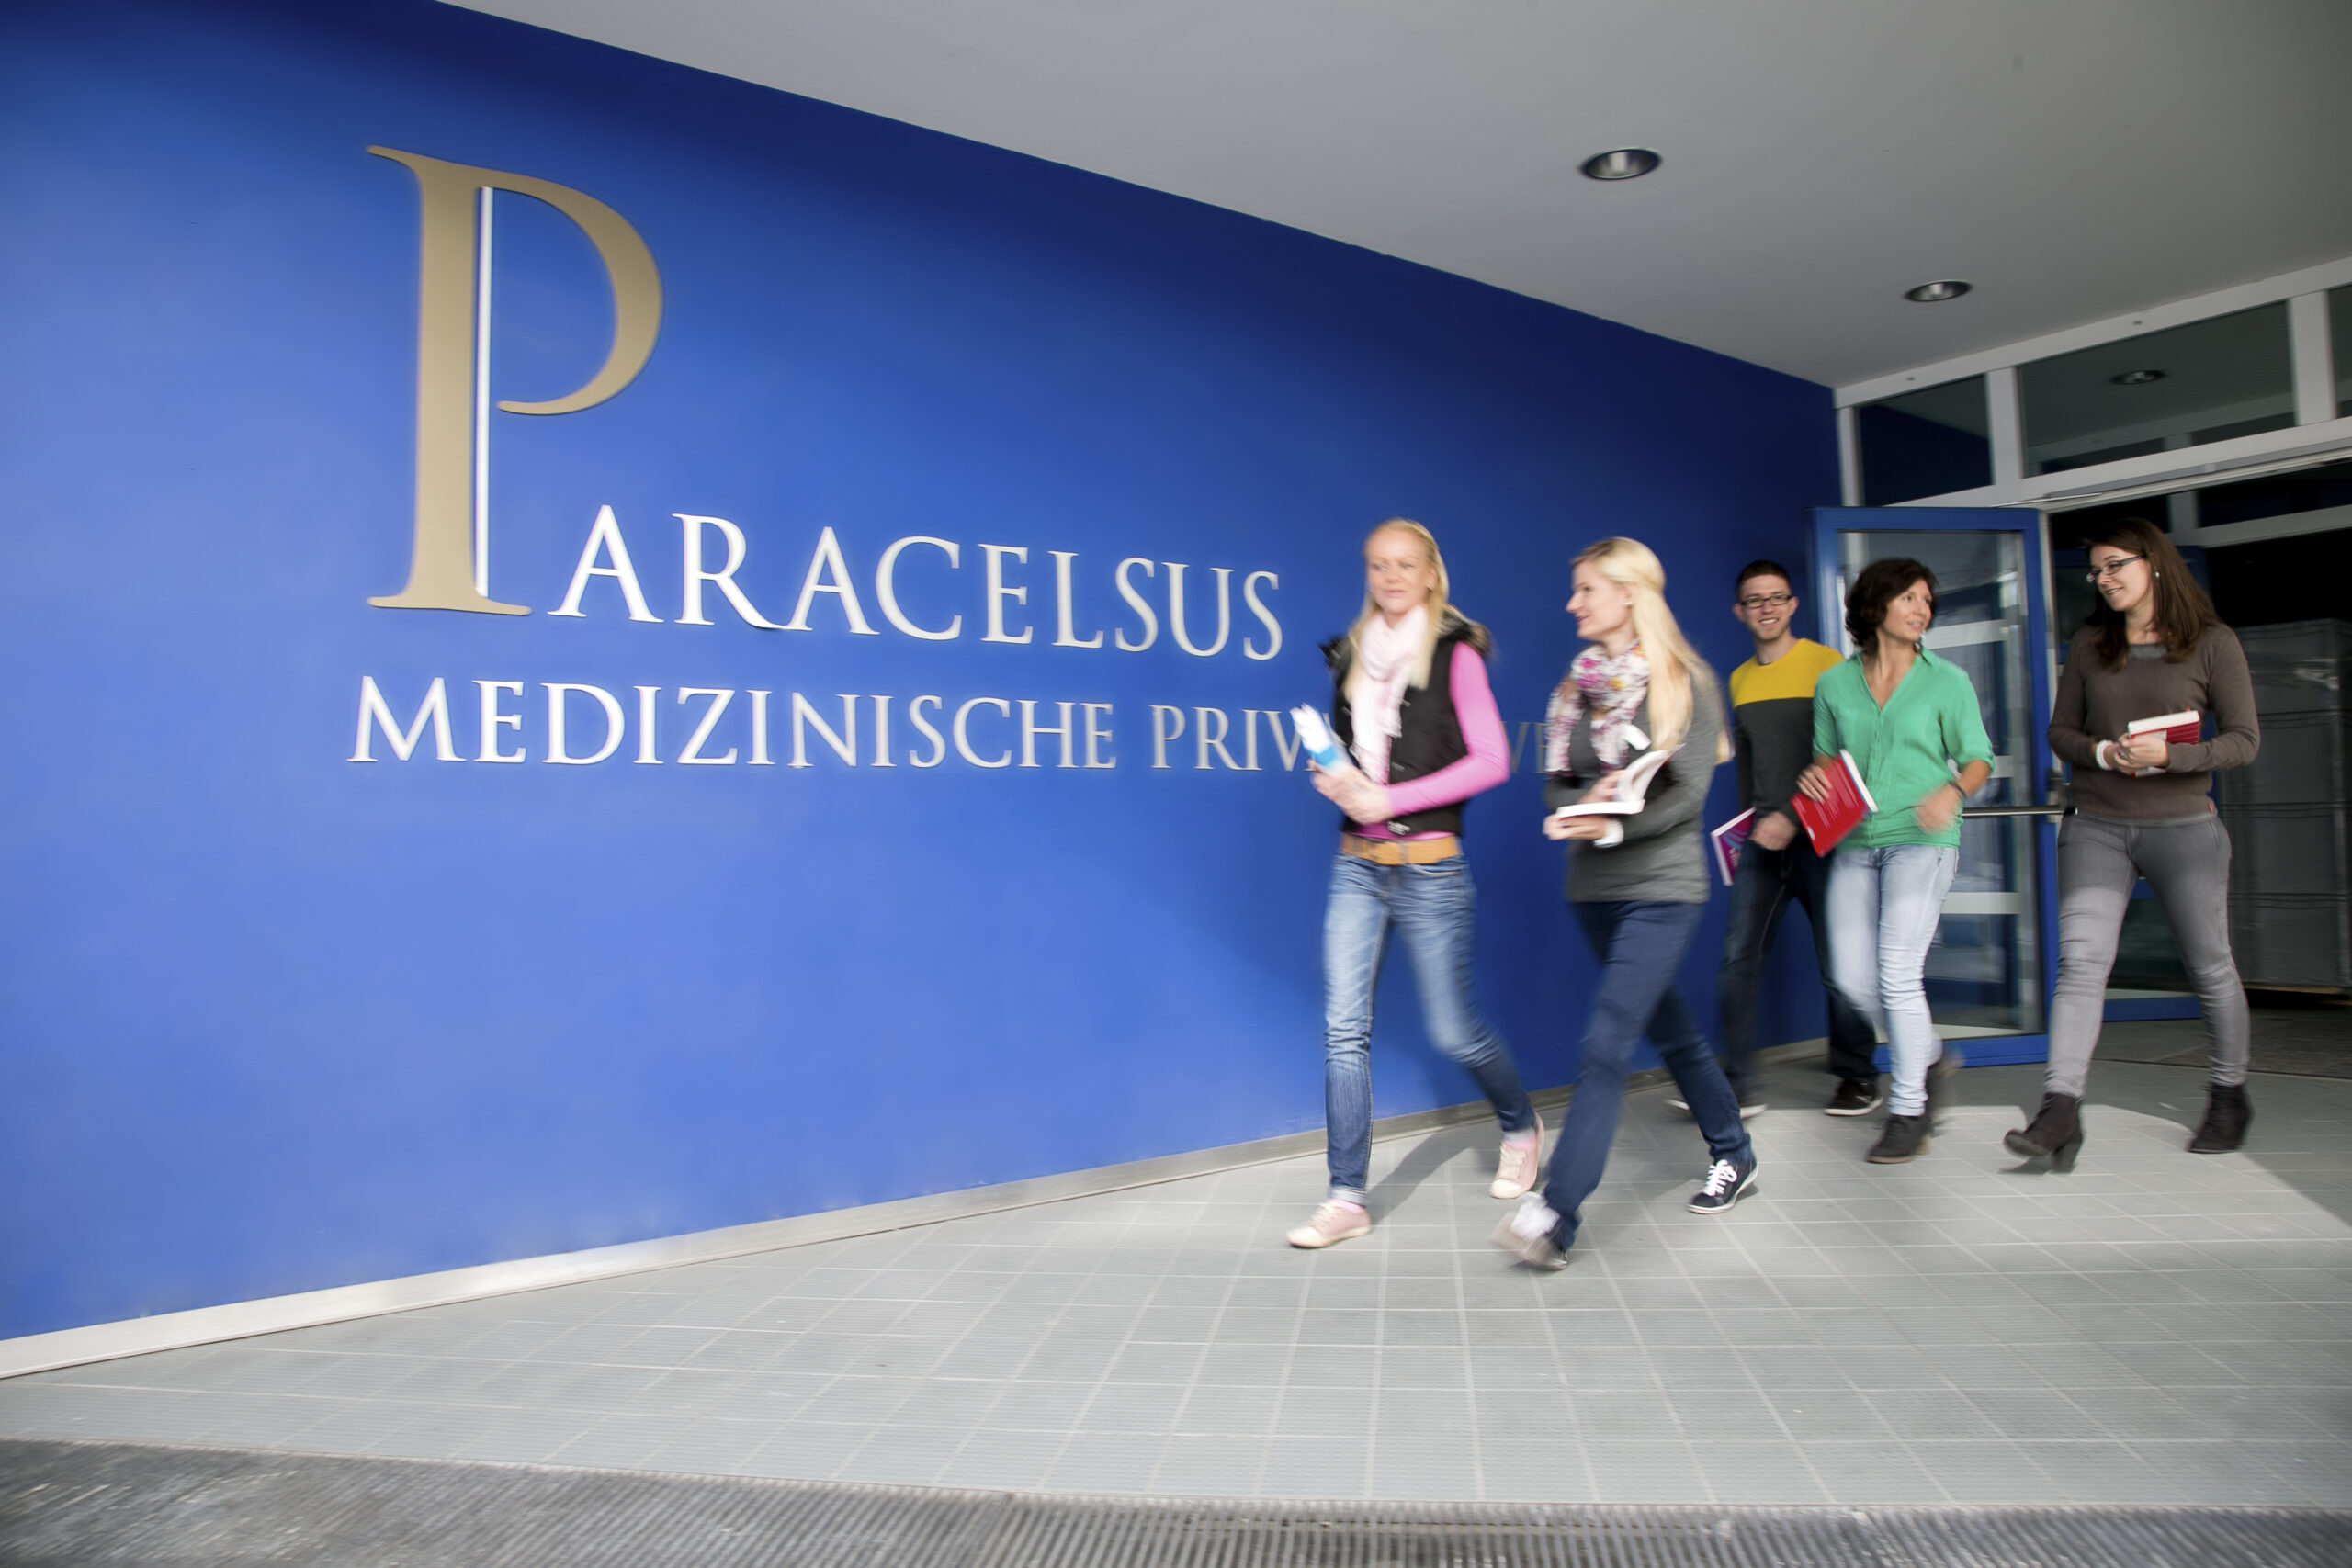 The Paracelsus Medical Private University as new institute partner